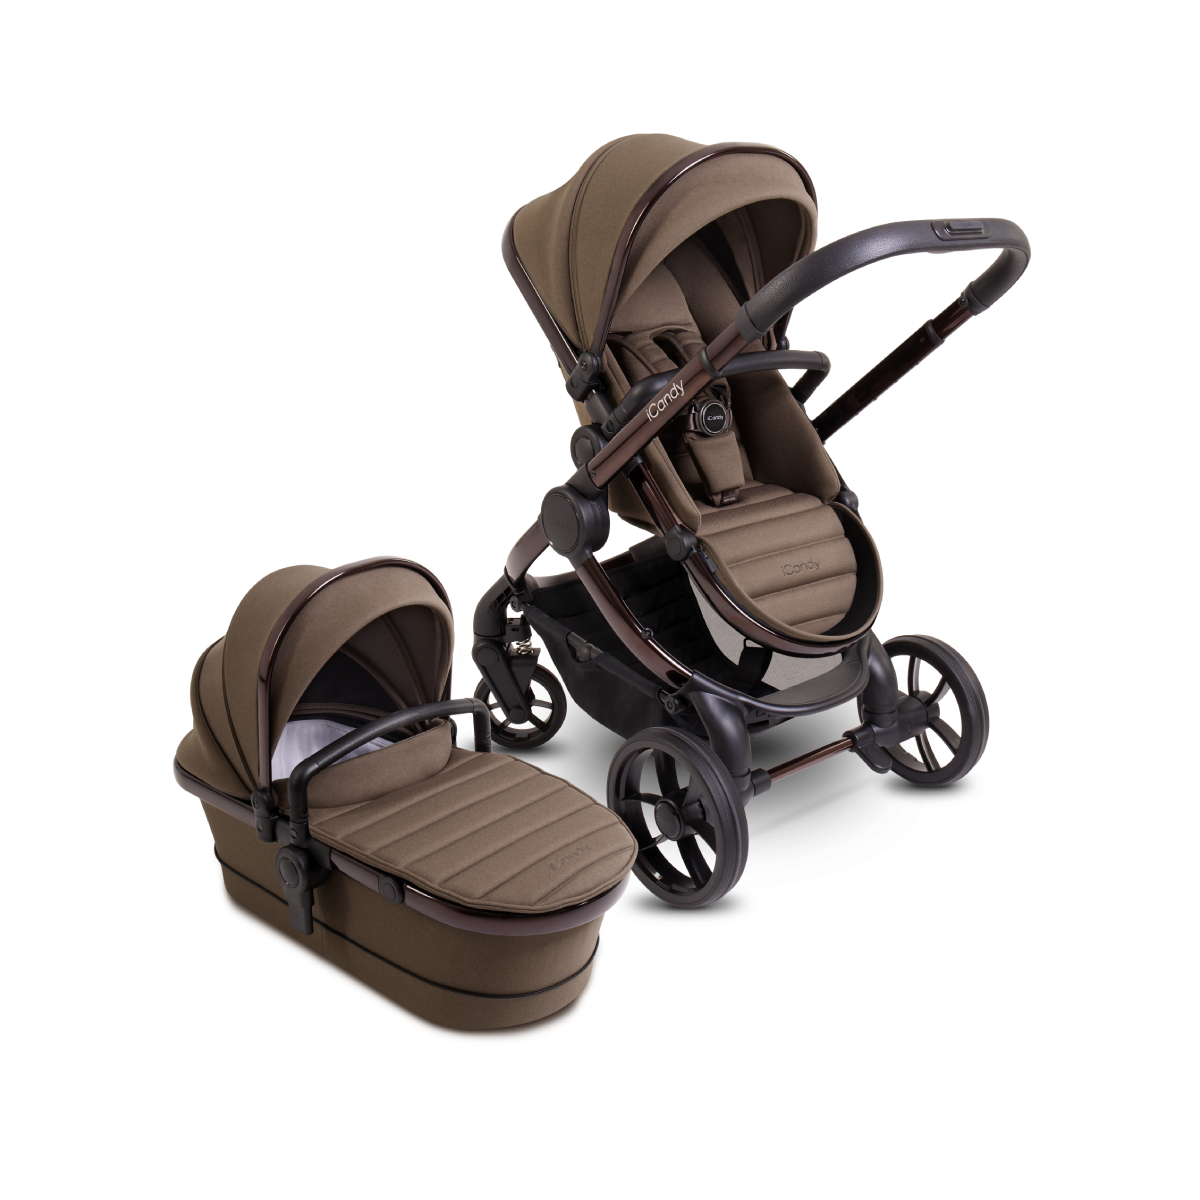 iCandy Peach 7 2in1 Combo Pushchair Bundle